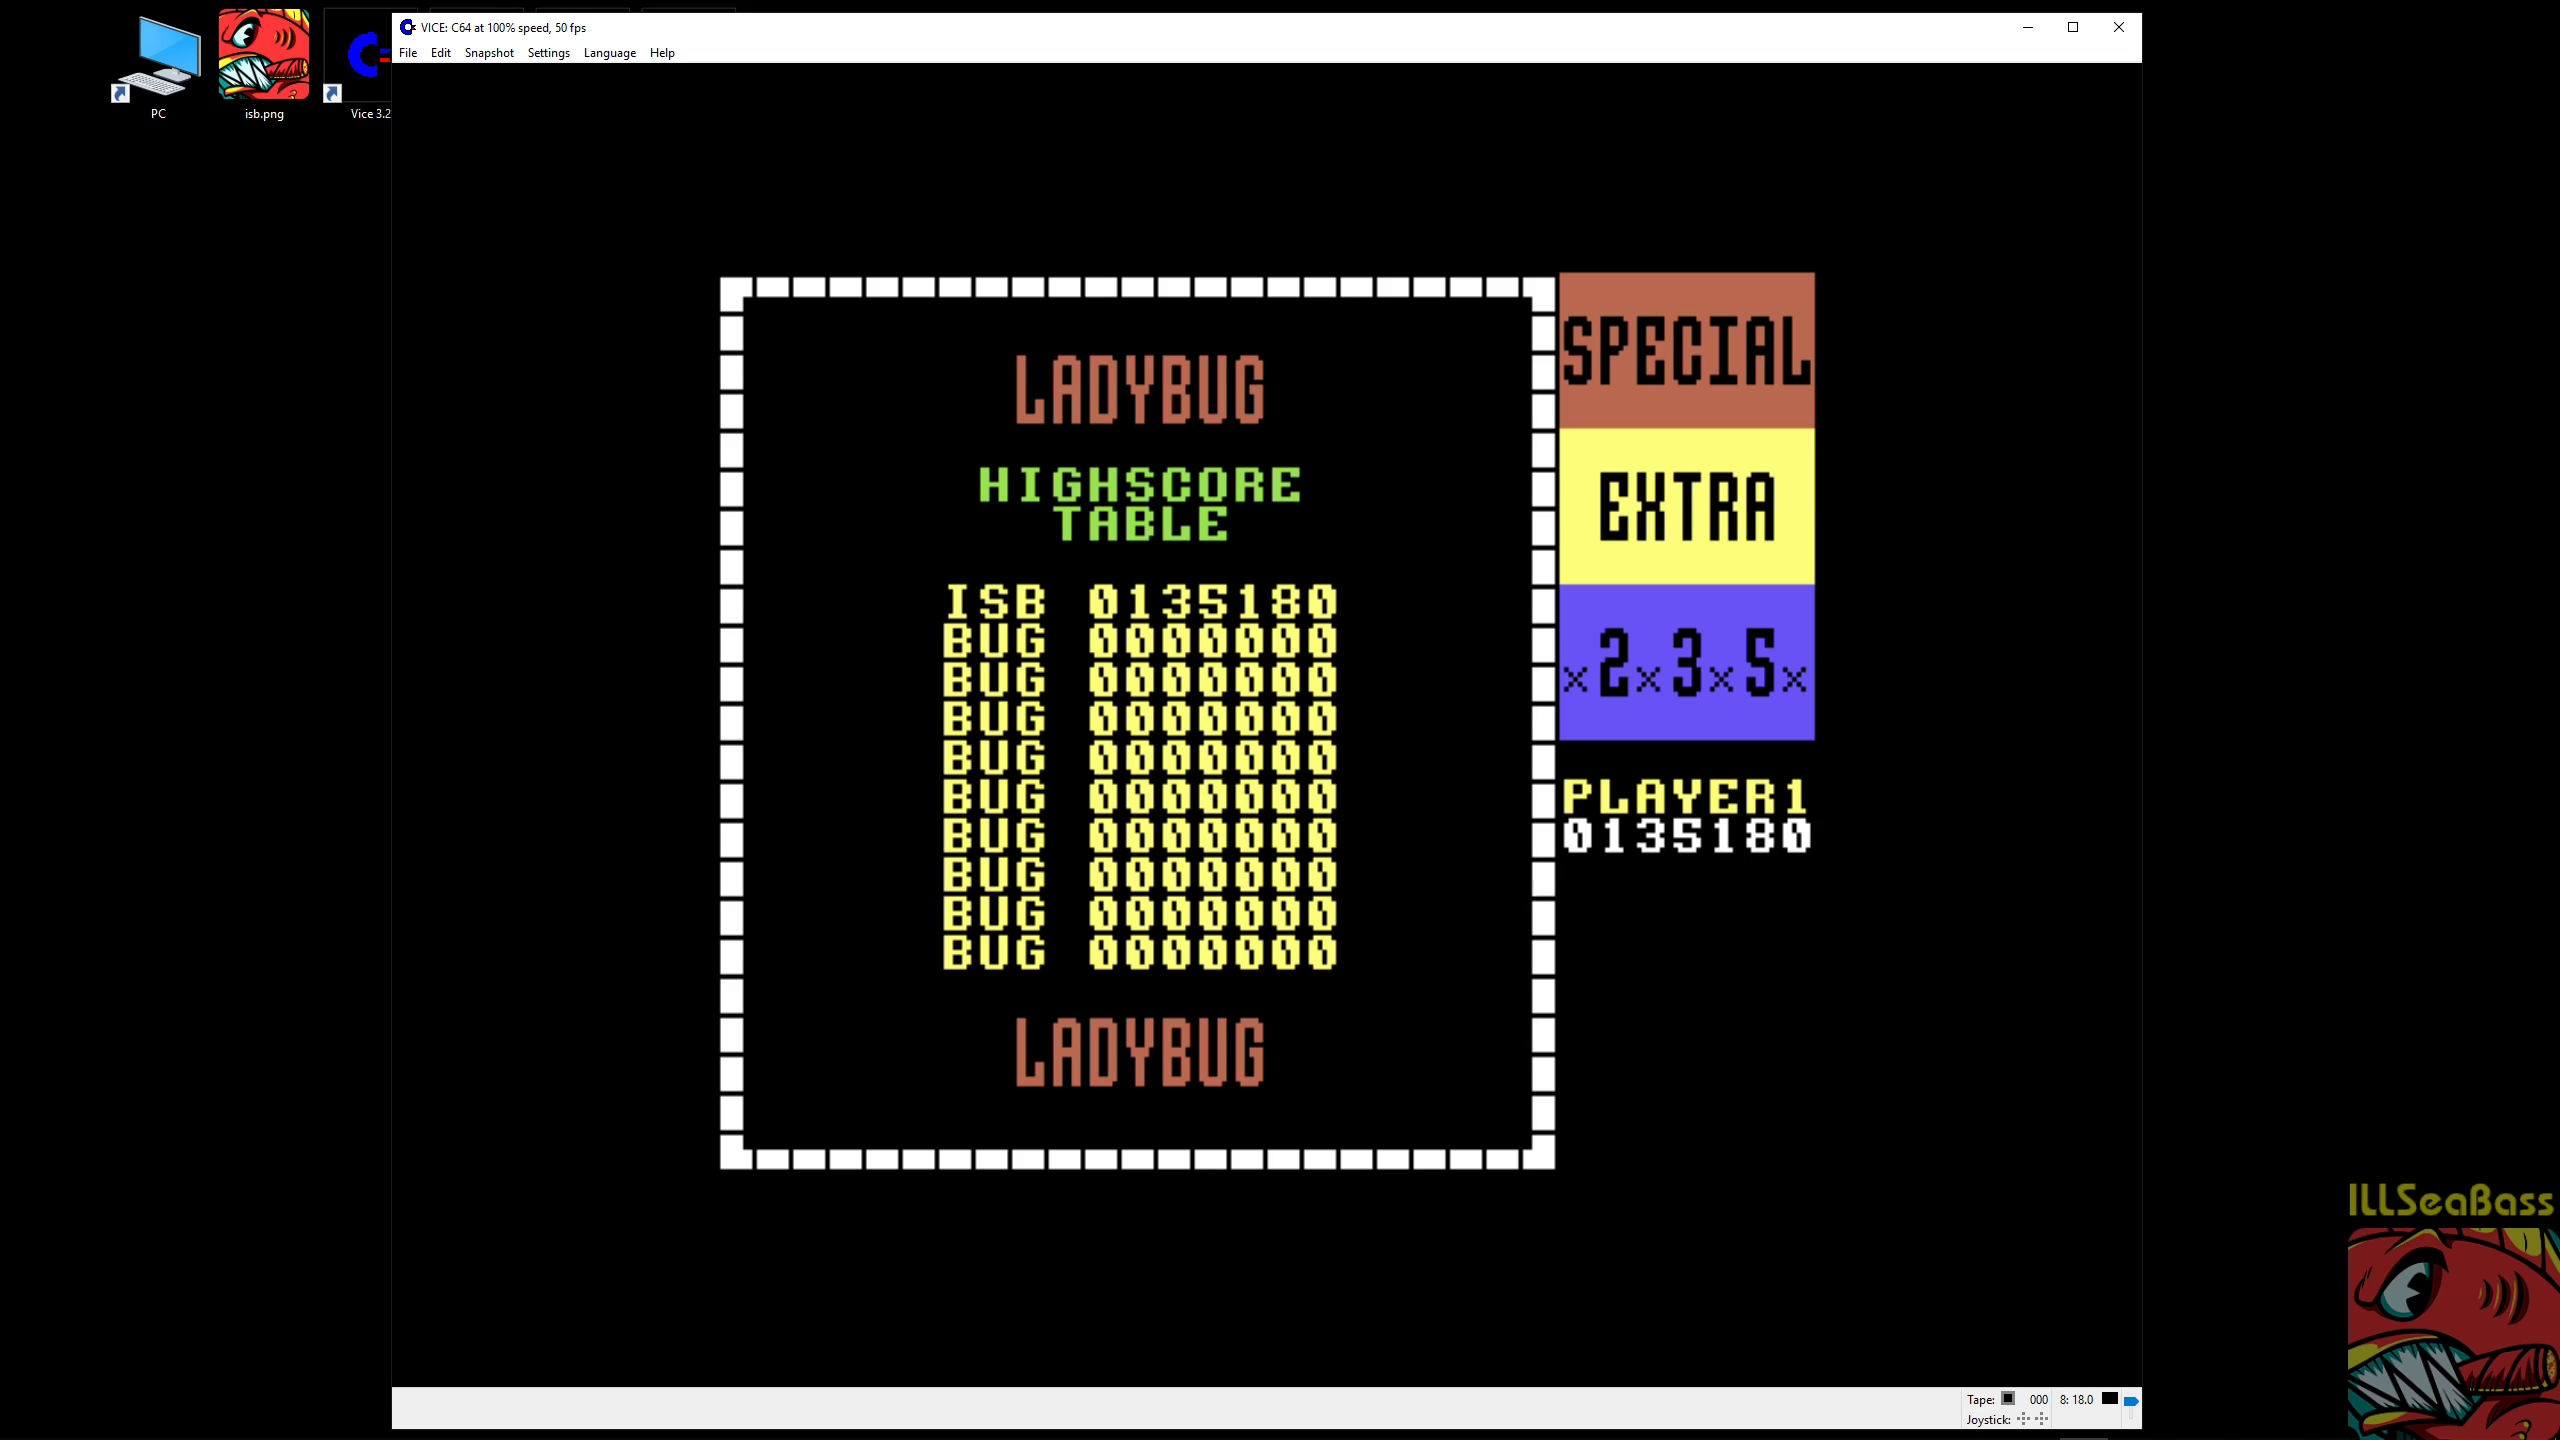 ILLSeaBass: Lady Bug (Commodore 64 Emulated) 135,180 points on 2019-02-26 06:39:22